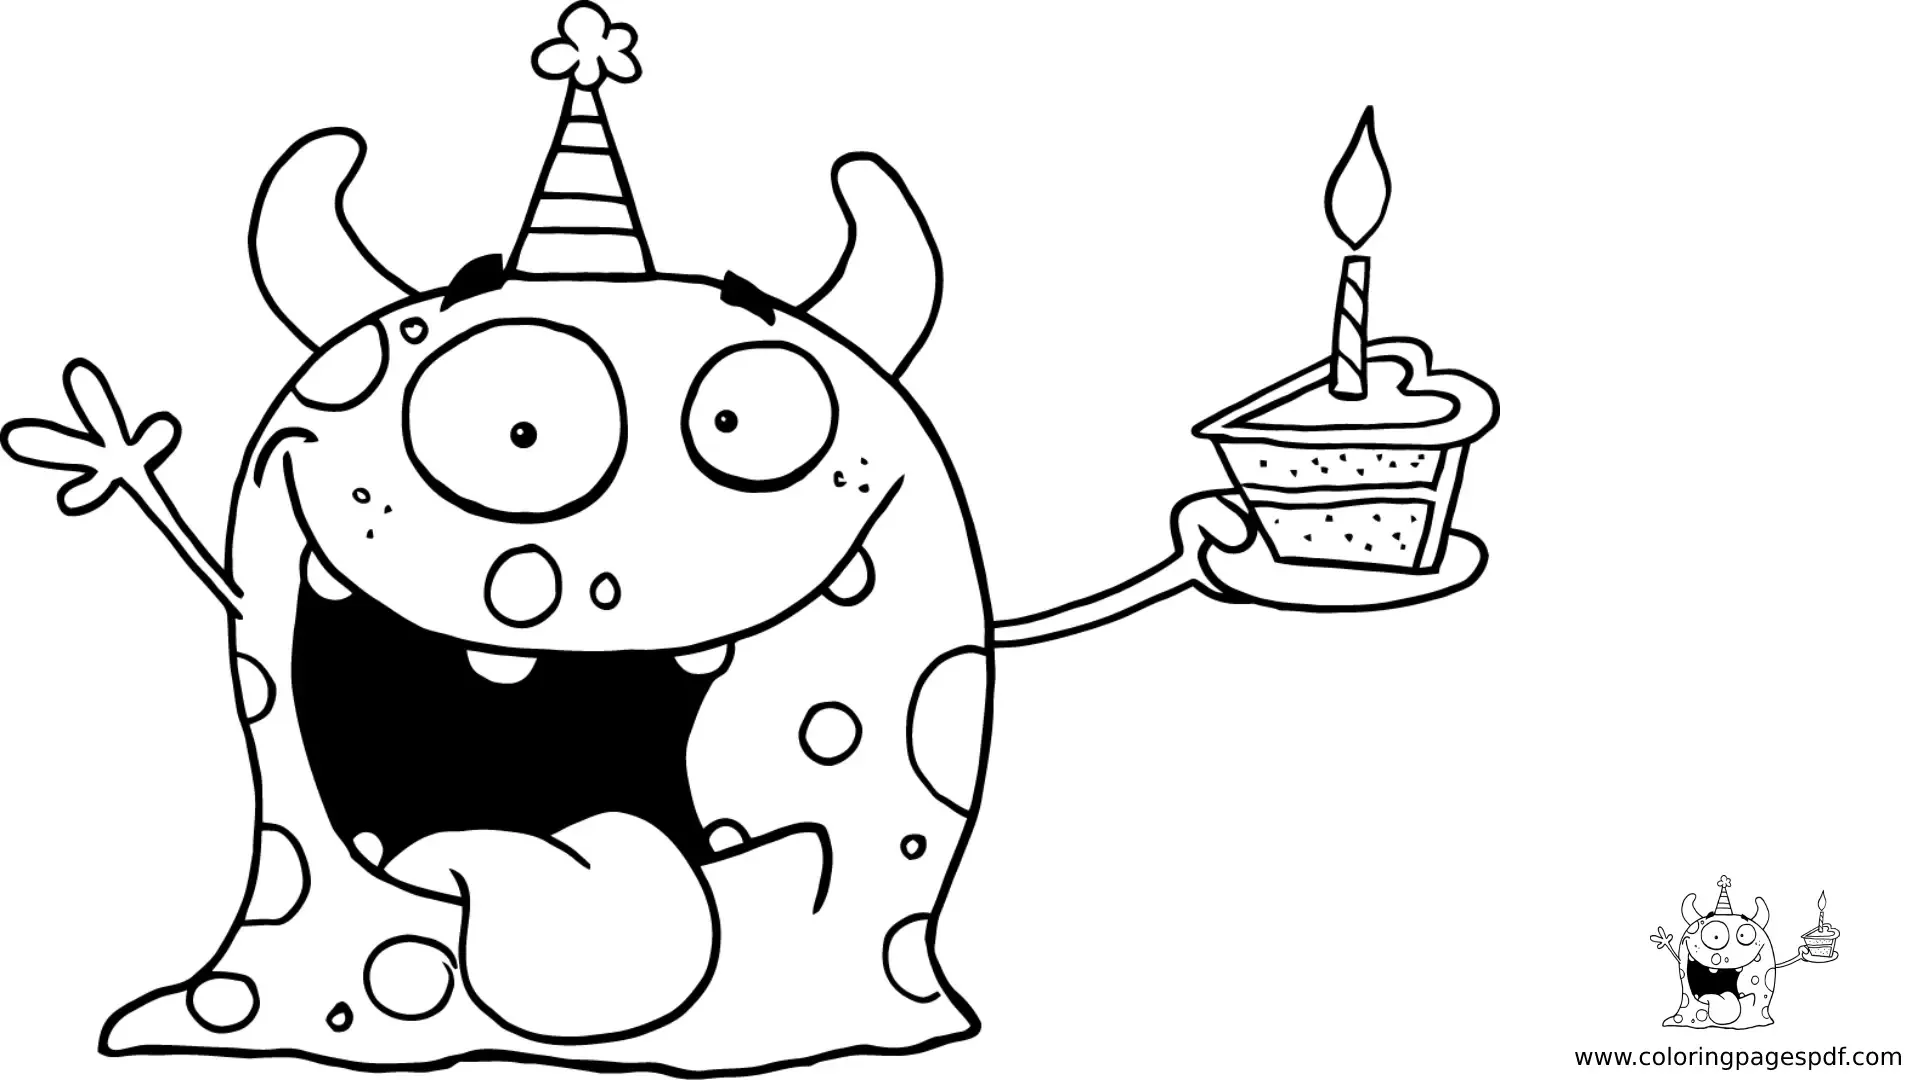 Coloring Pages Of A Monster Eating Birthday Cake